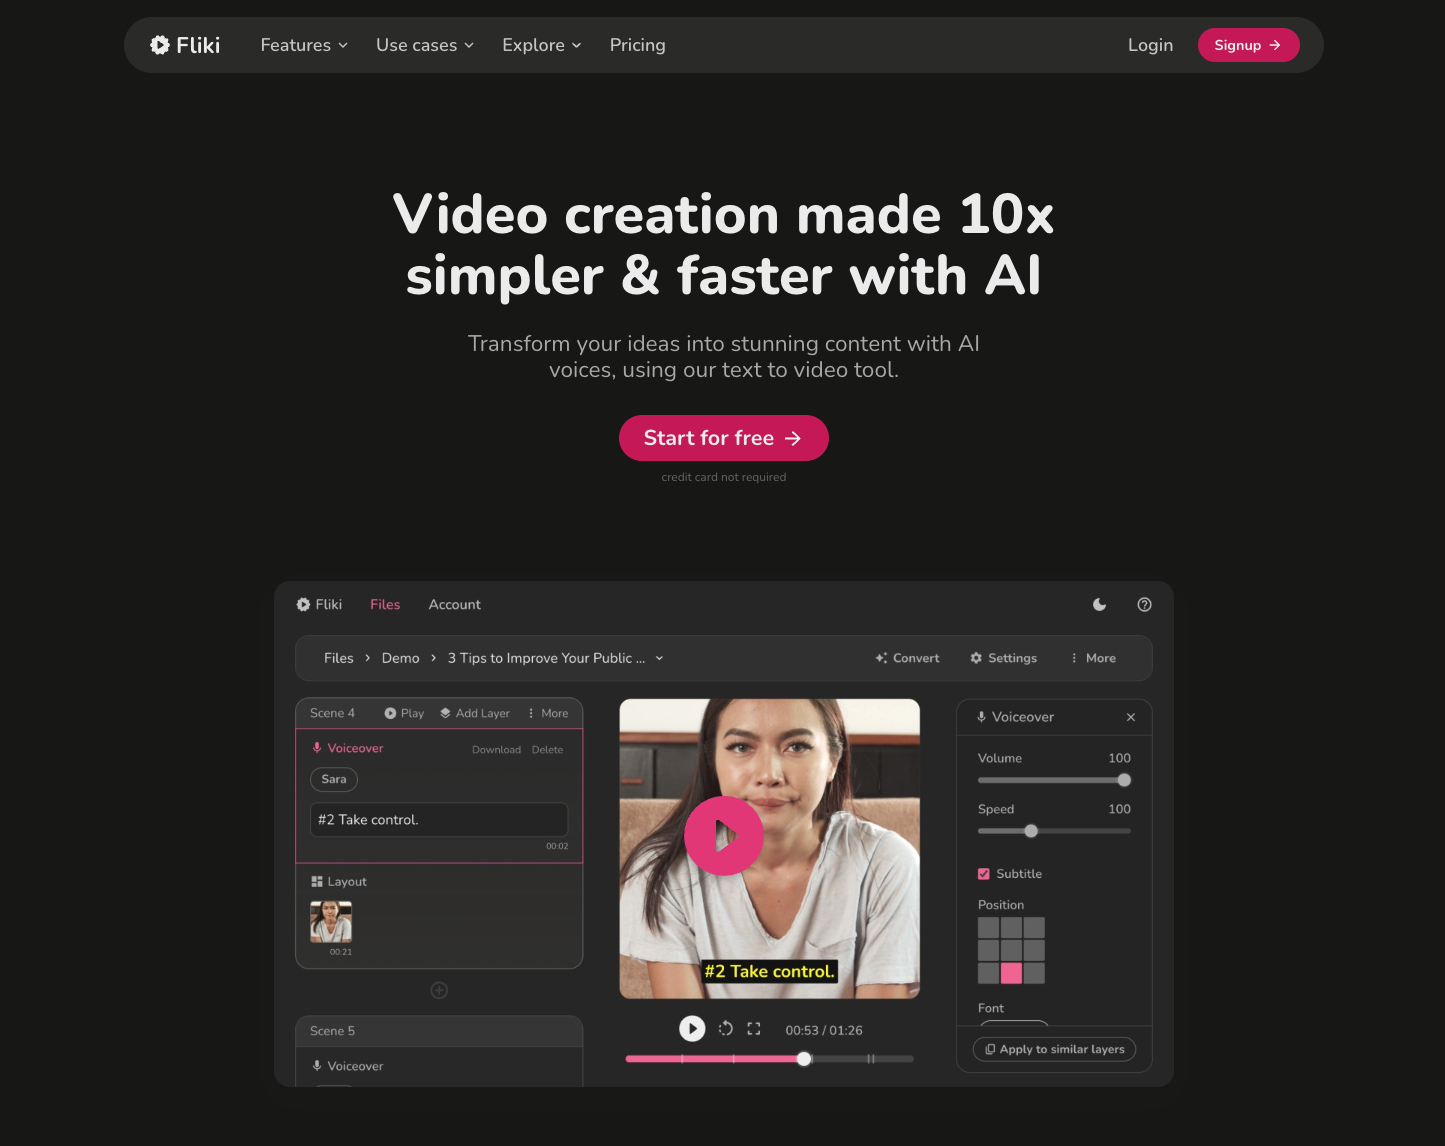 Fliki’s official video to show you how their video creation tool works